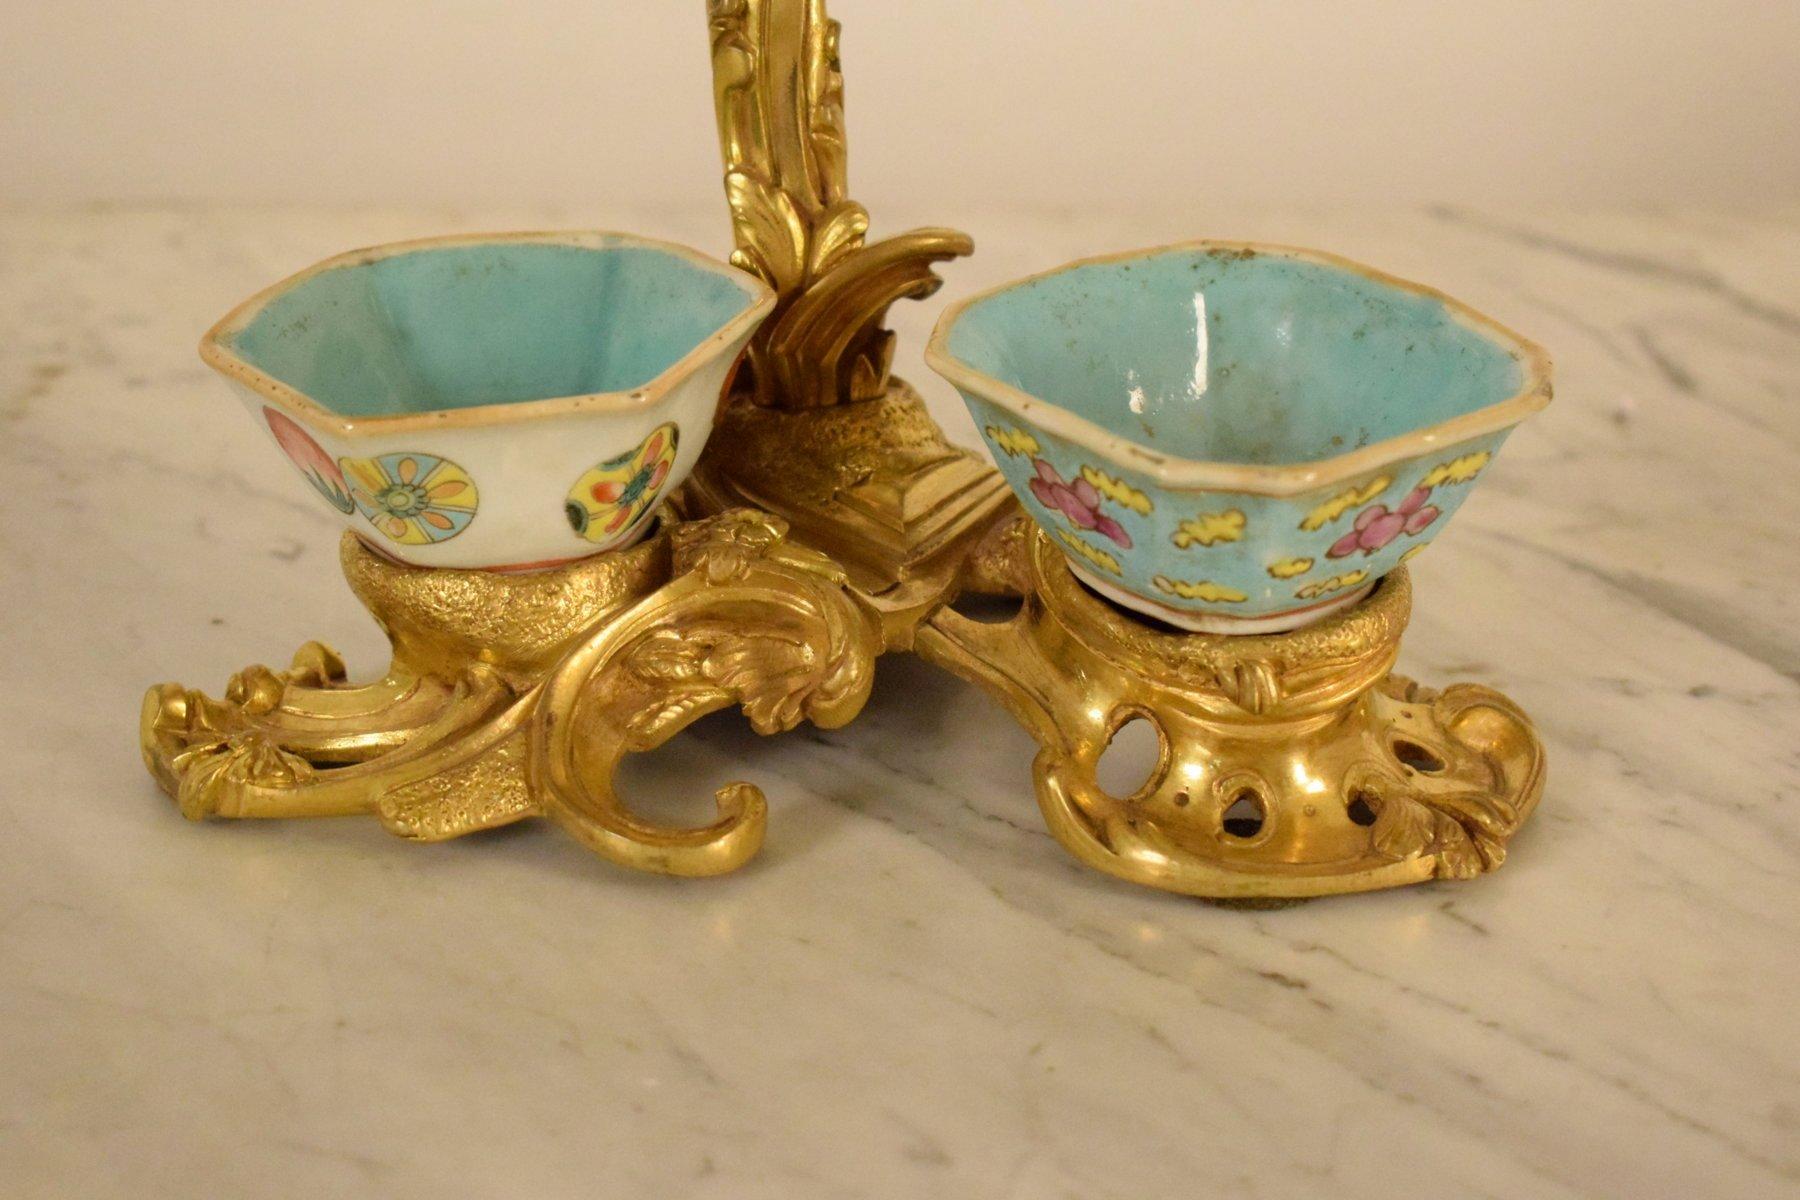 19th Century French Gilt Bronze Desk Candlestick with Cinese Ceramic Inkwell  1